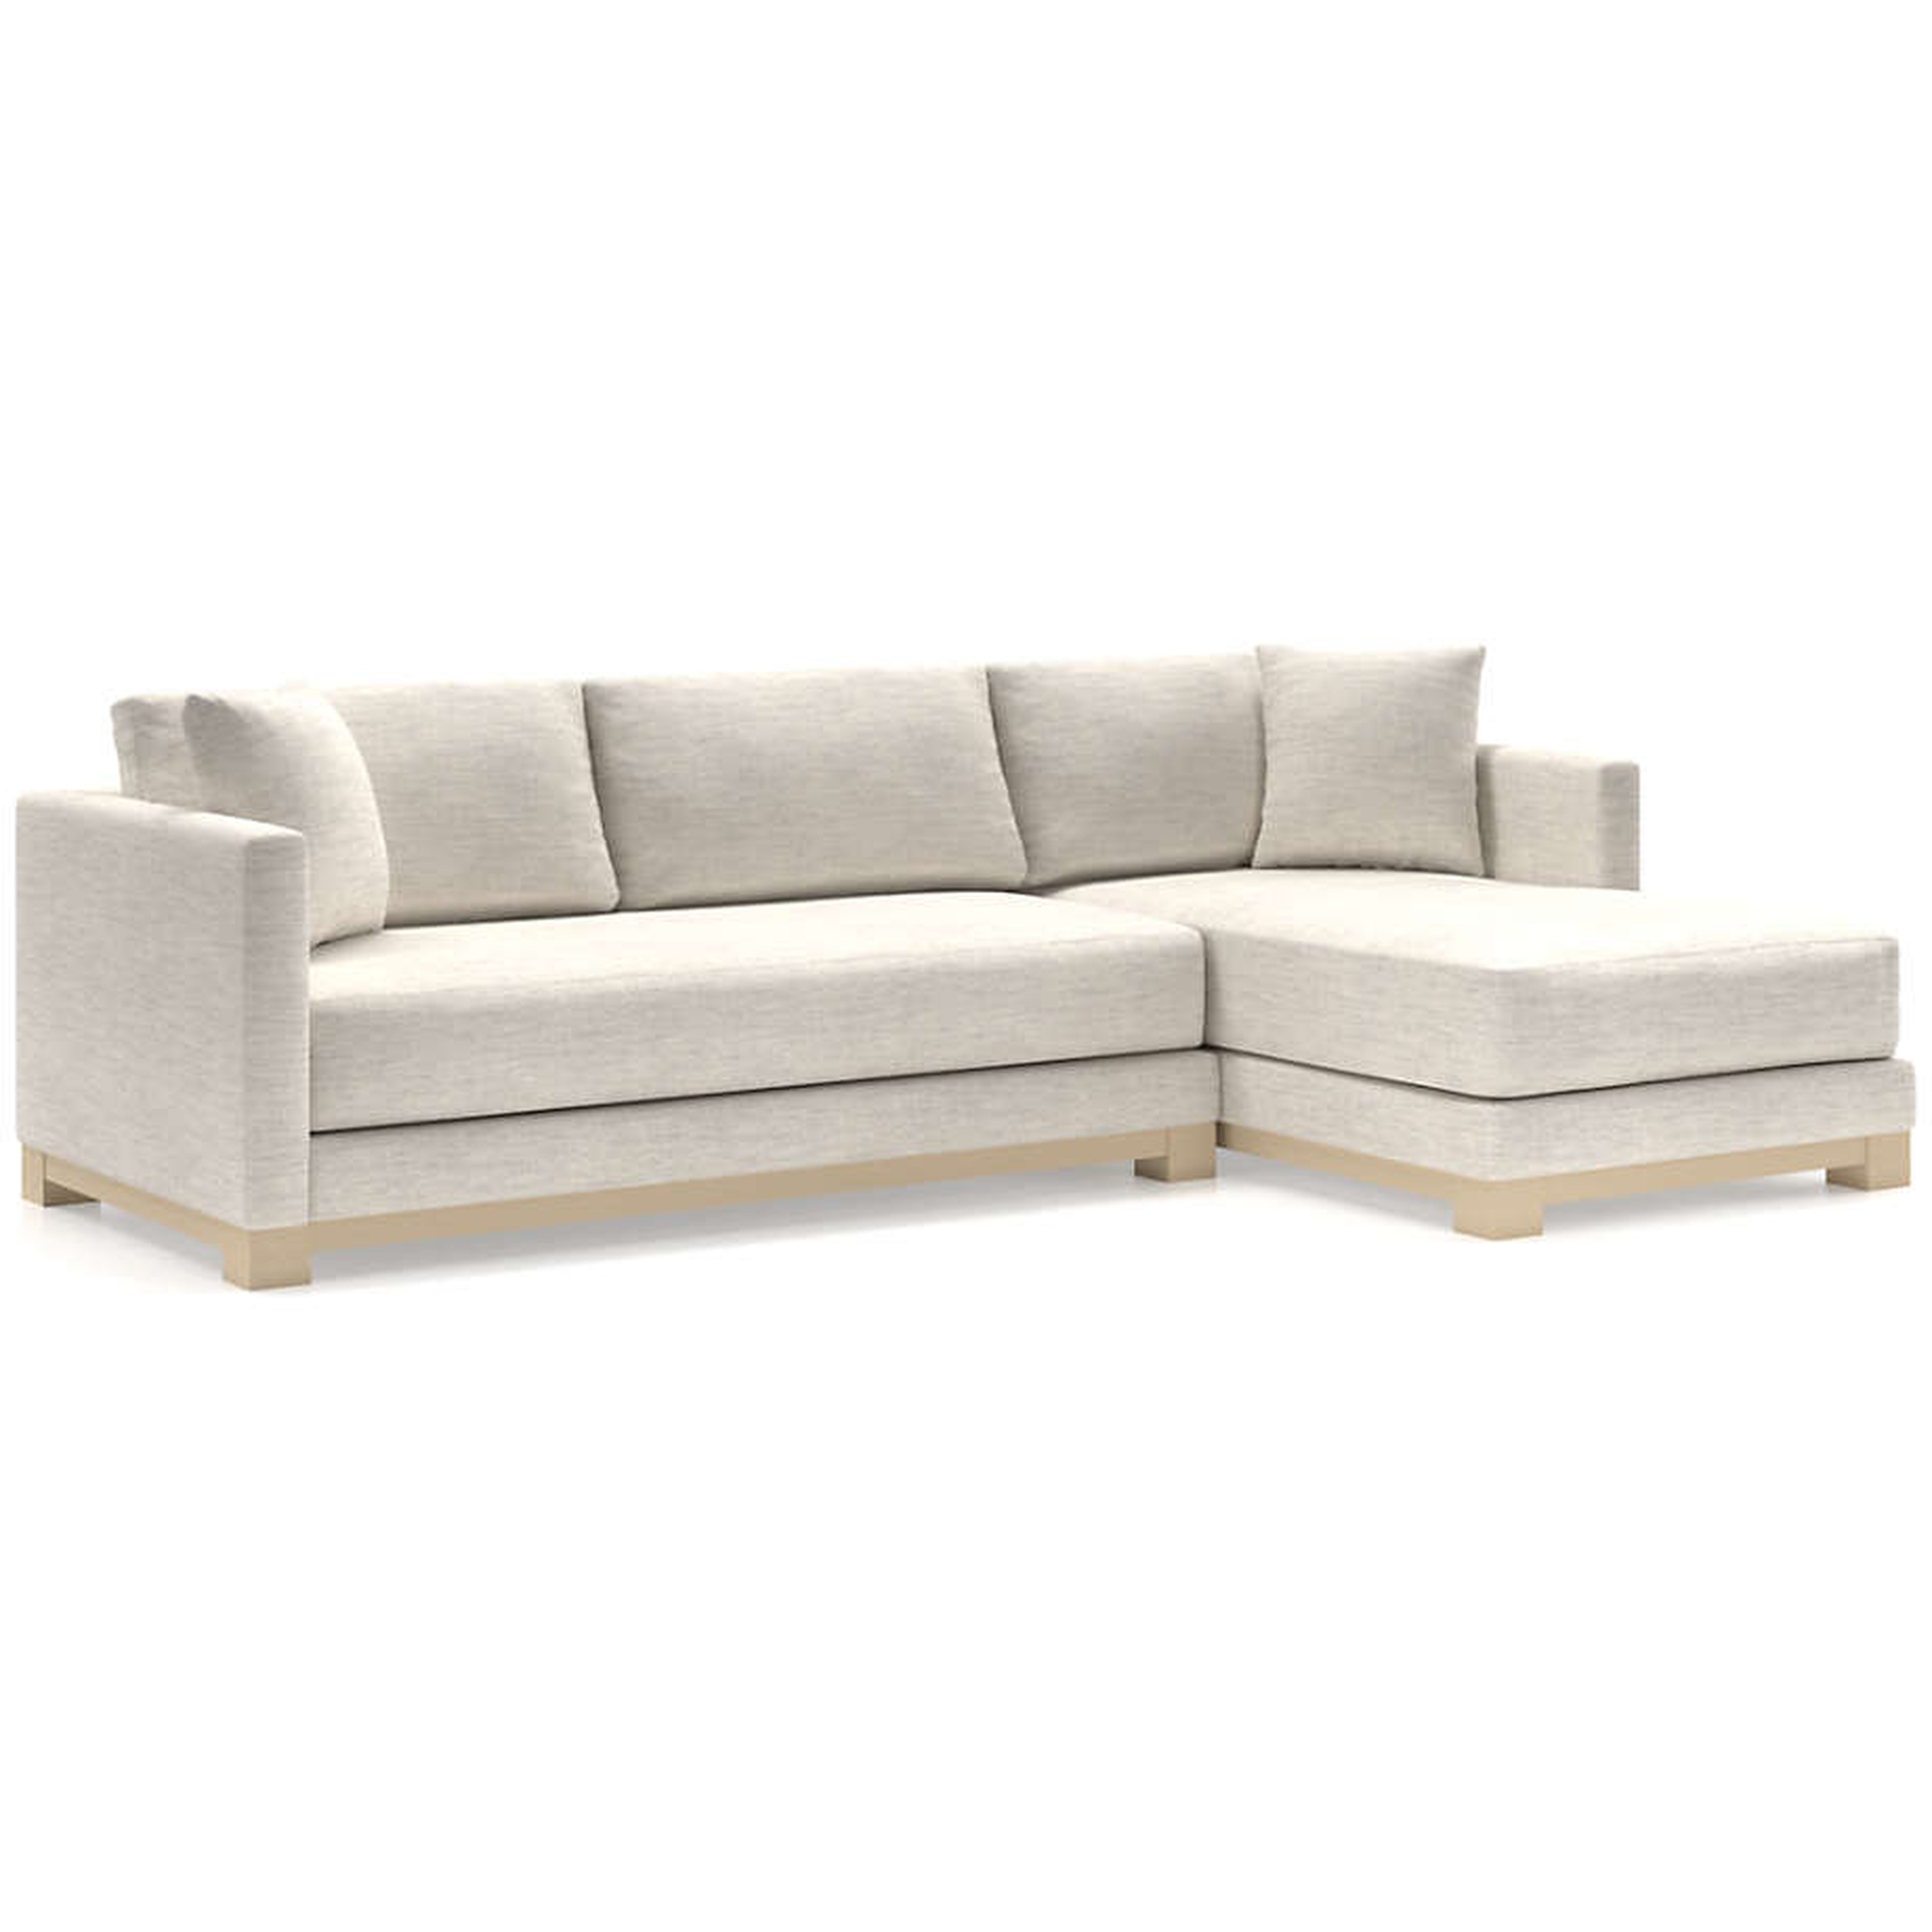 Gather Petite Wood Base 2-Piece Sectional - Crate and Barrel